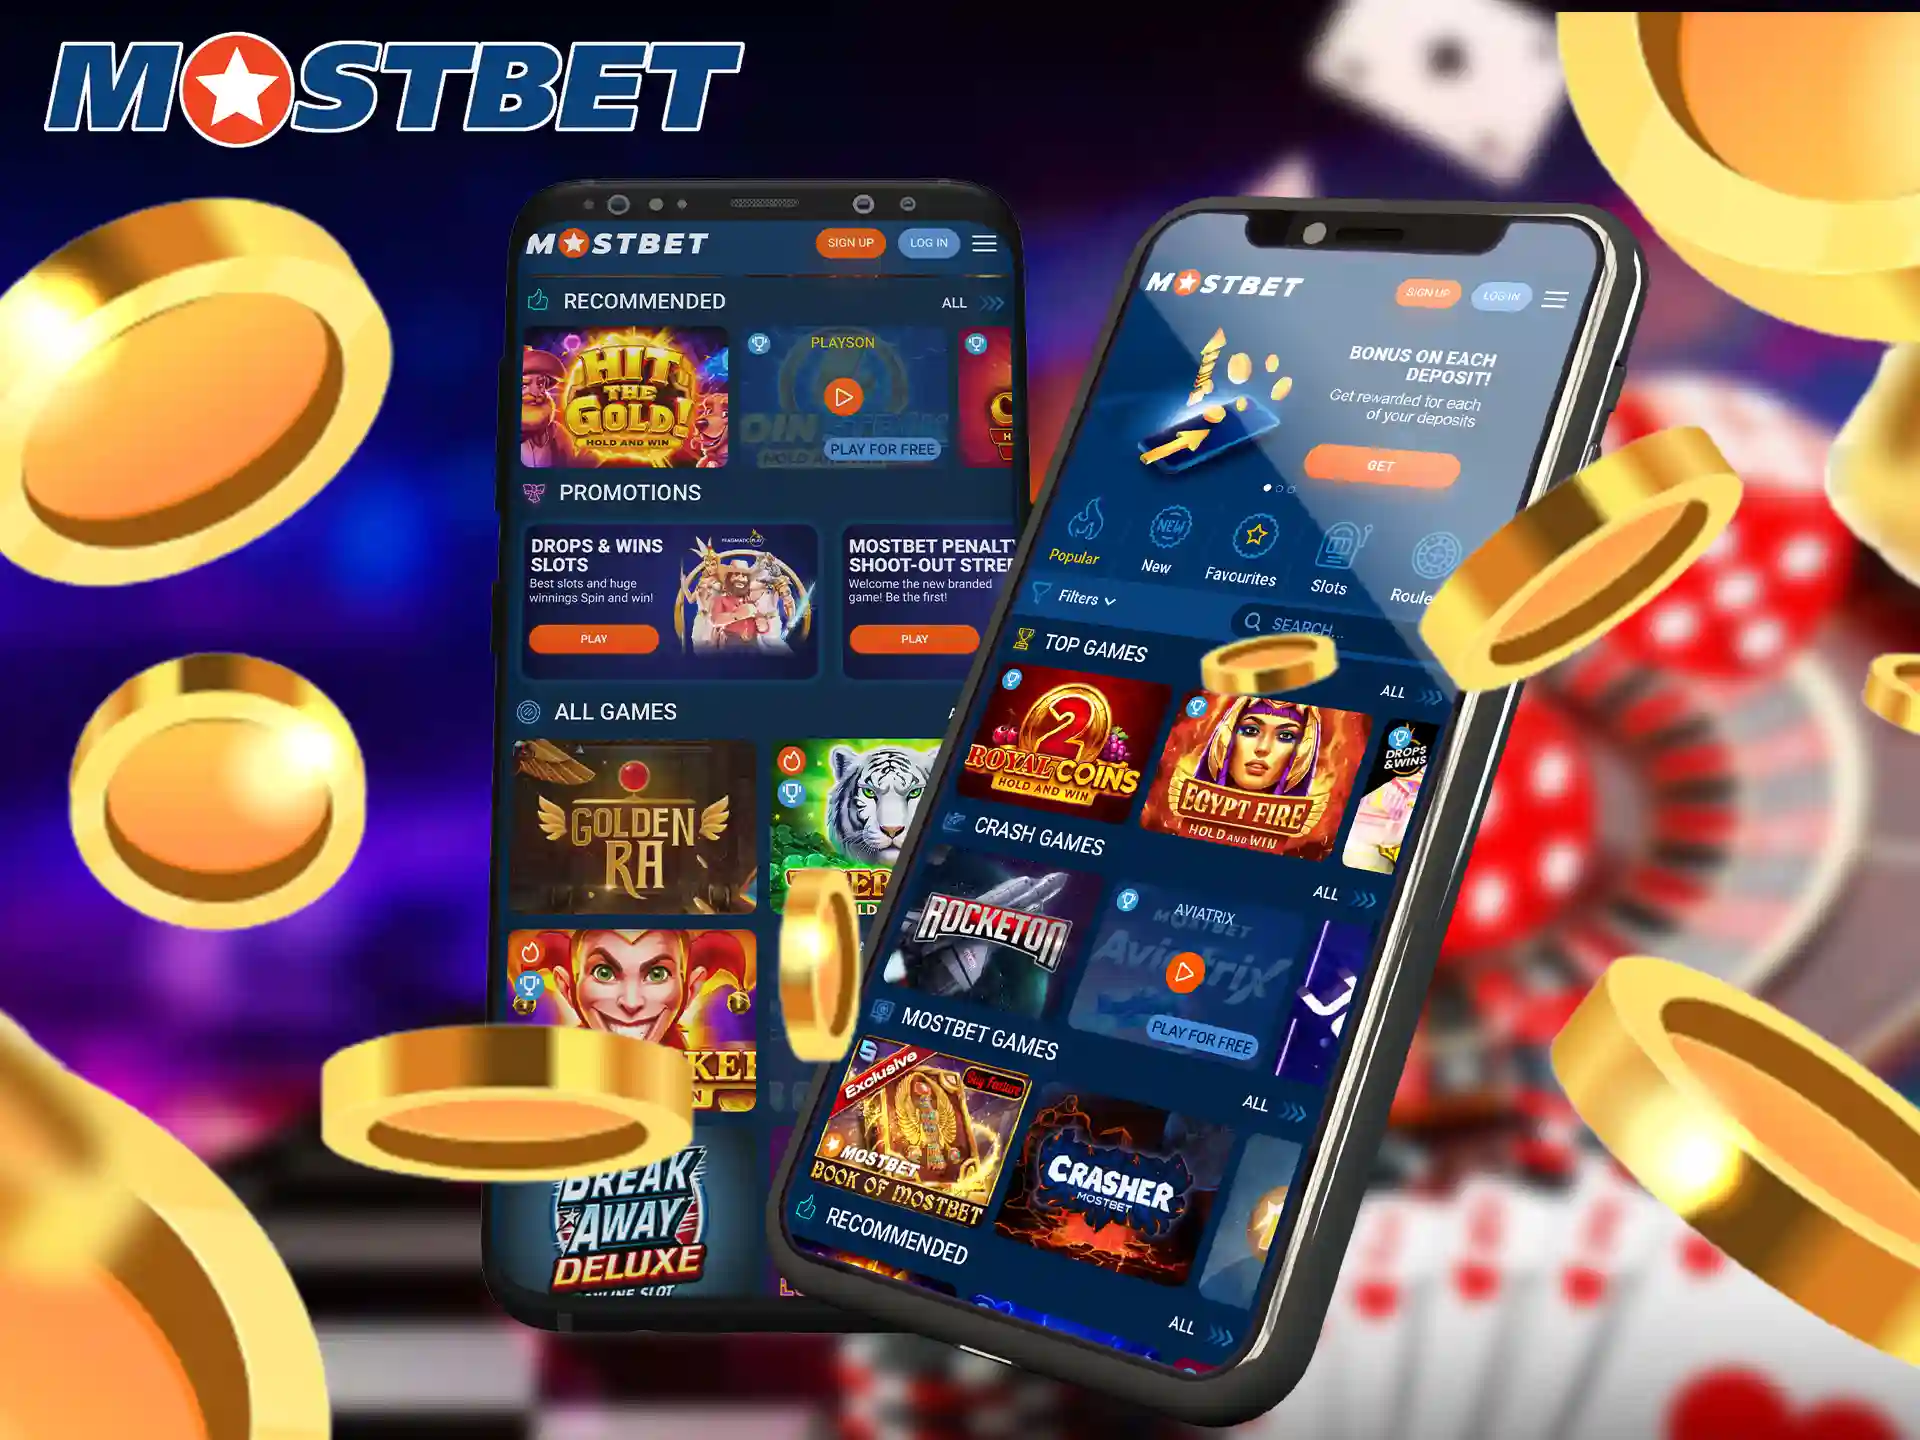 Play the best casino games, install the app from Mostbet on your smartphone.